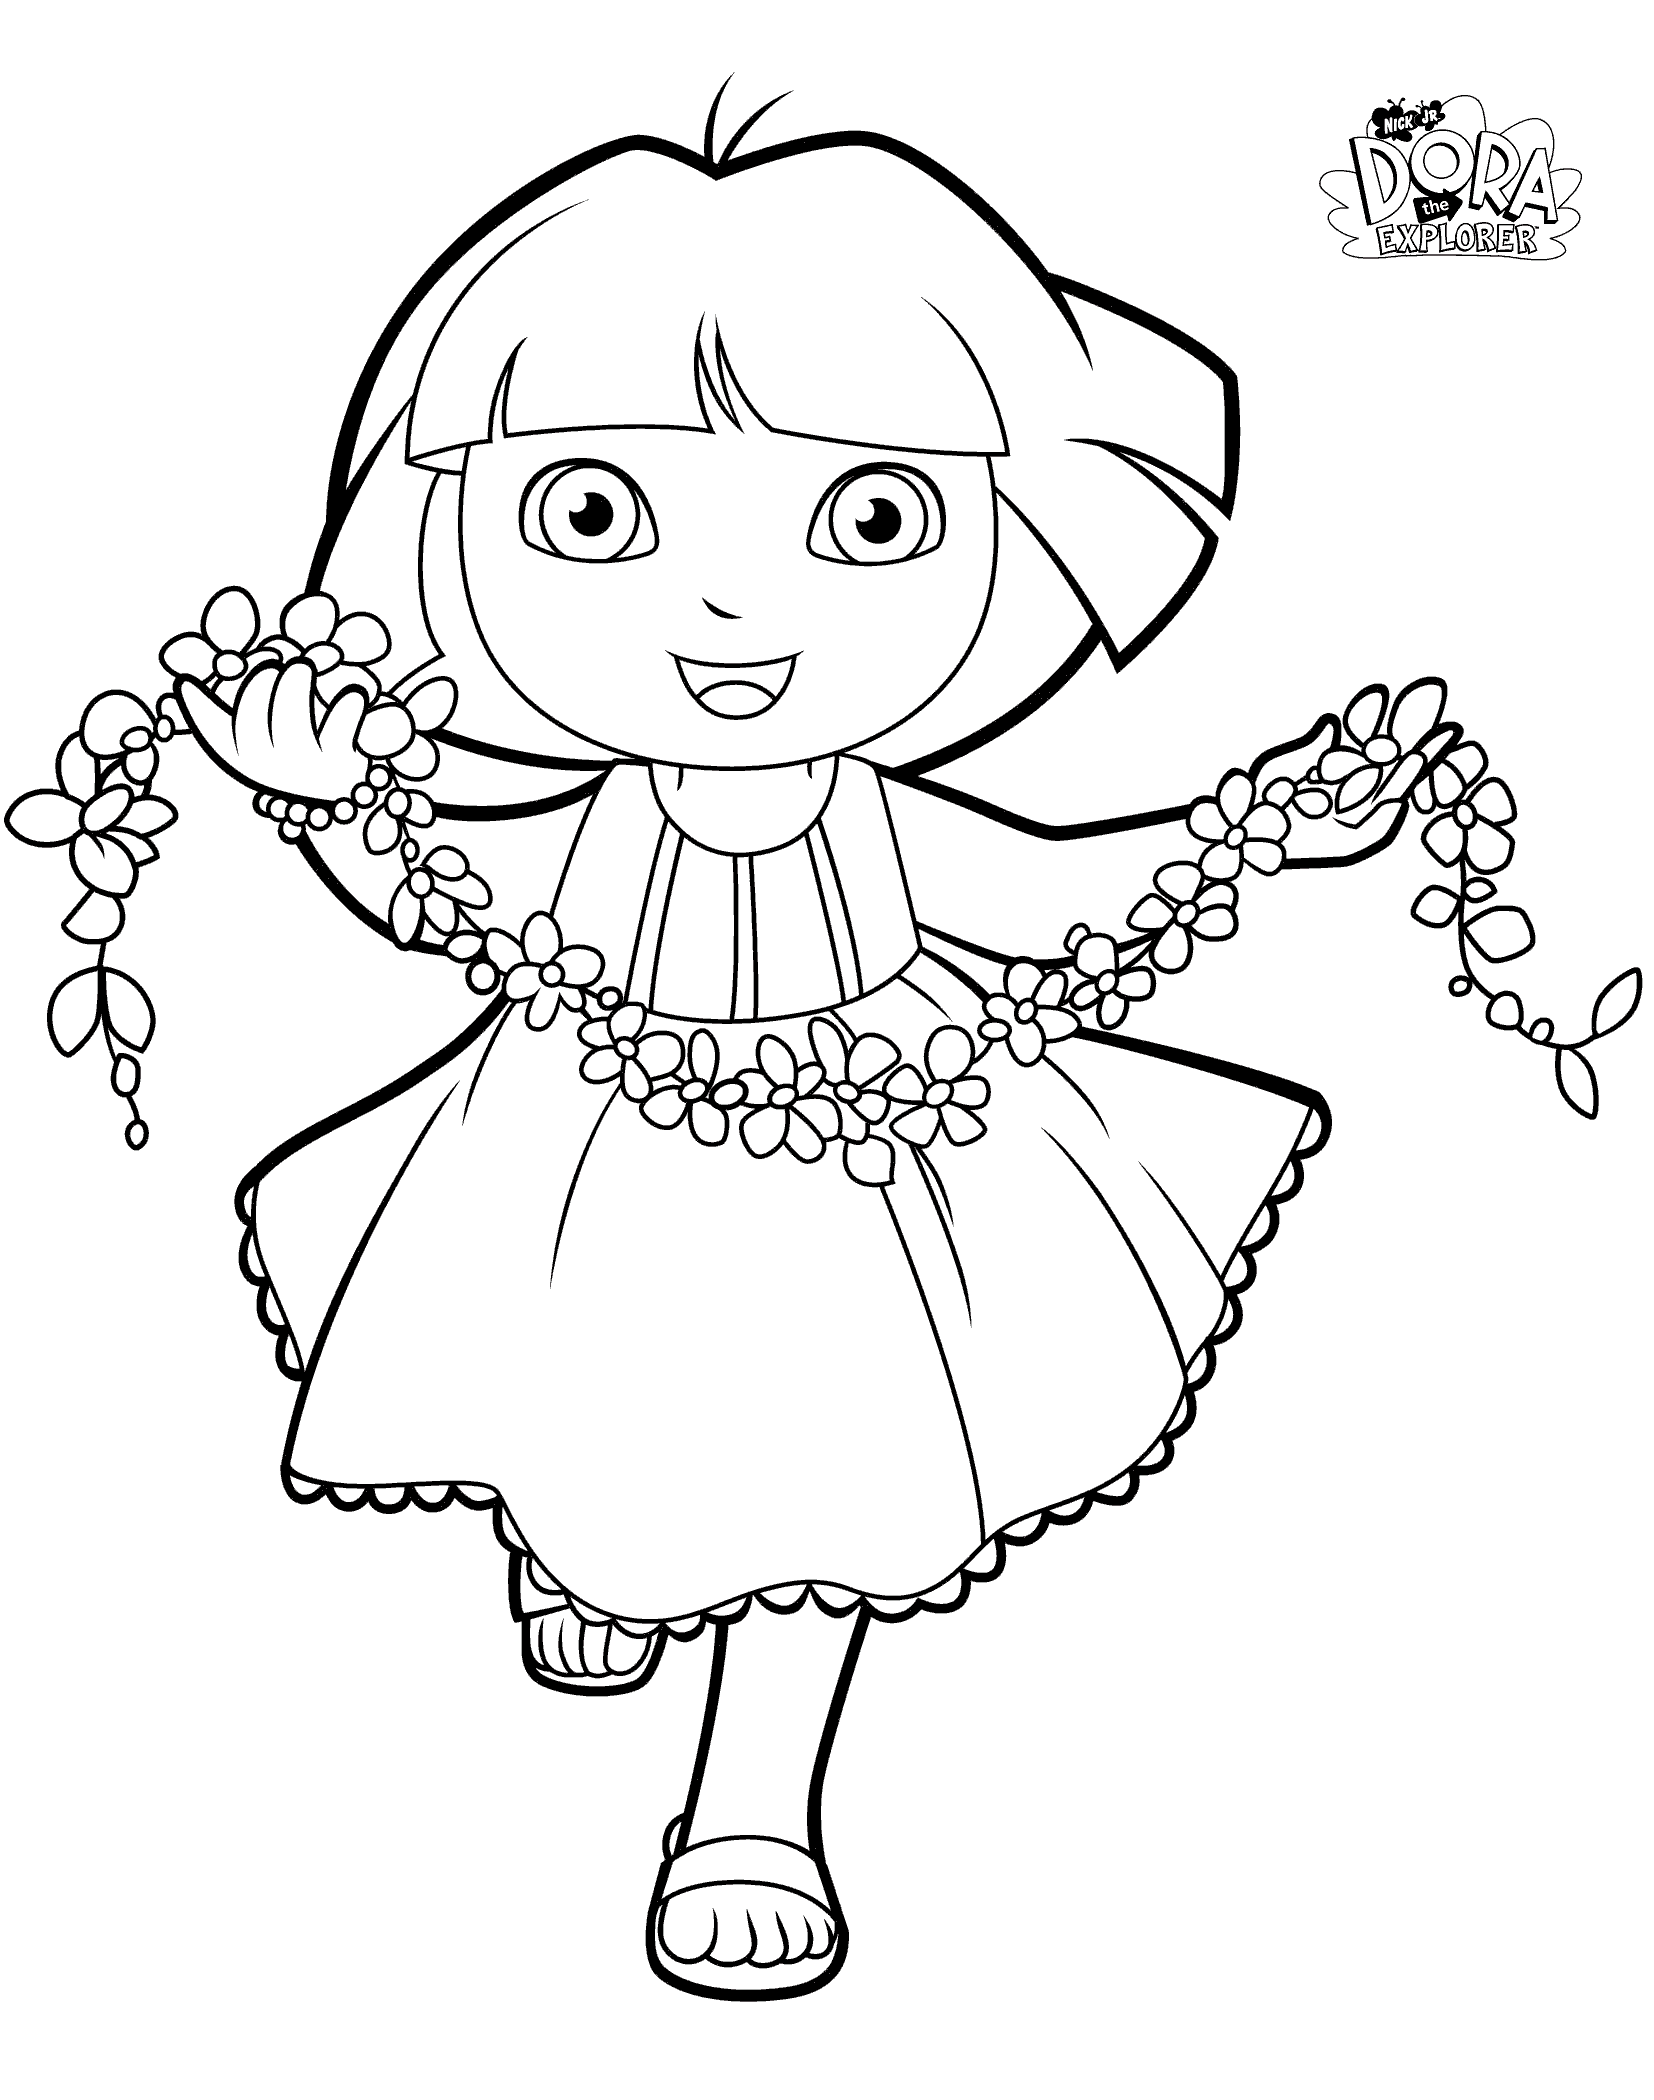 Coloring Pages For Dora The Explorer Star Coloring Pages Free Coloring Porn Sex Picture